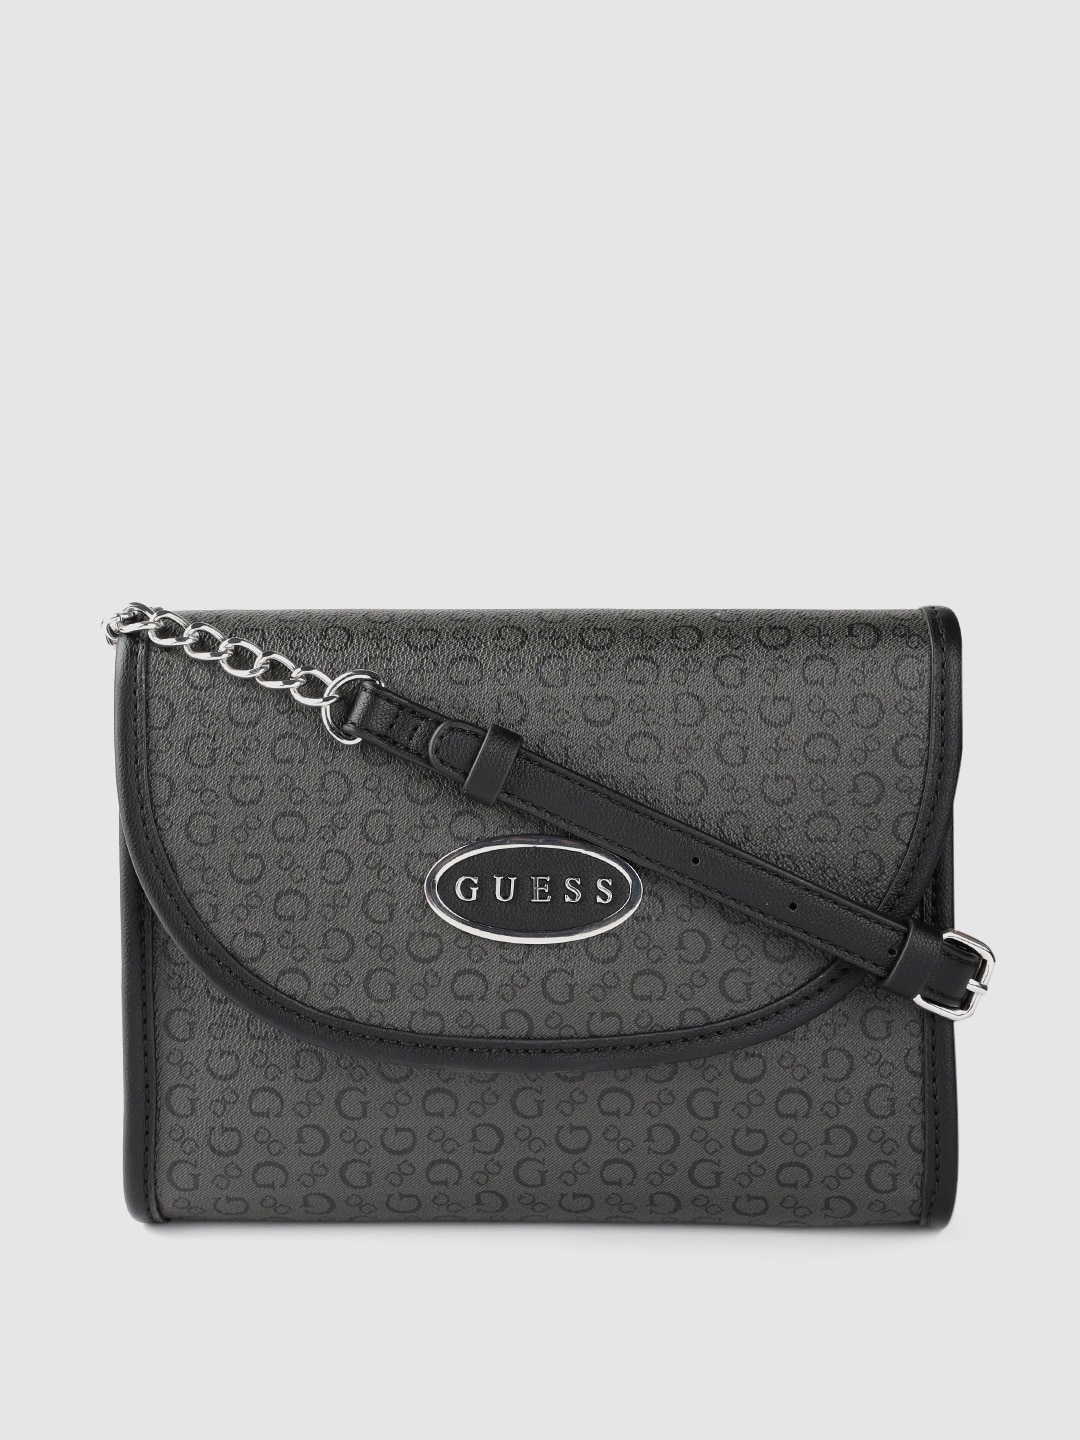 GUESS Charcoal Grey & Black Brand Logo Print Sling Bag & Non-Detachable Sling Strap Price in India